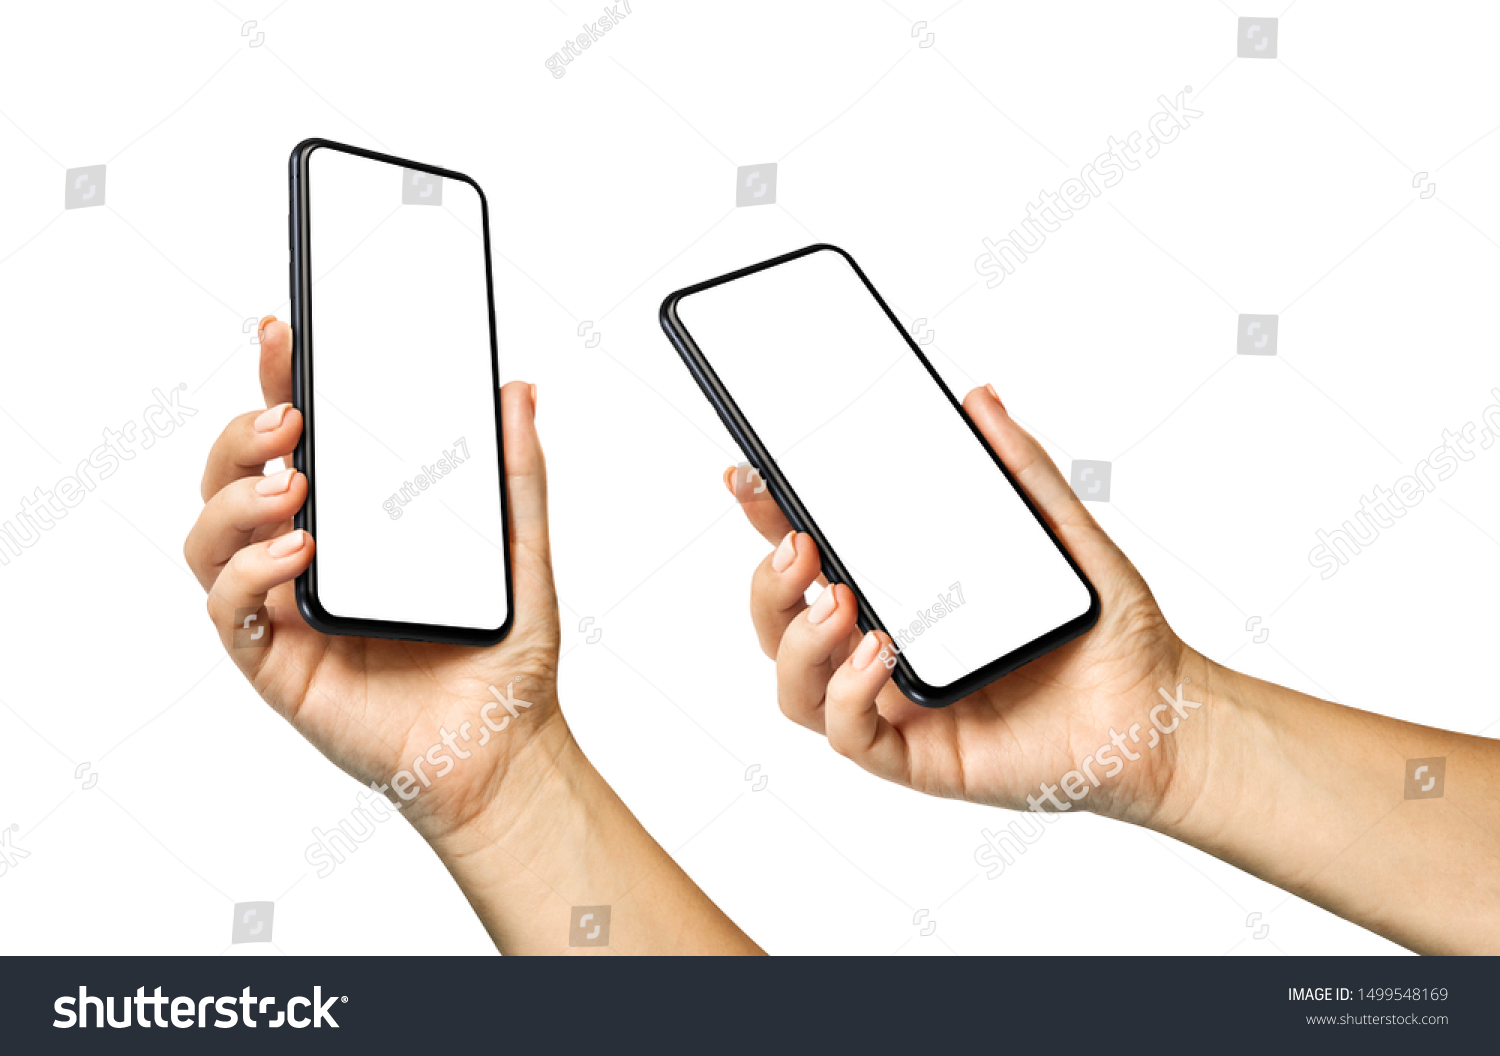 Woman hand holding the black smartphone with blank screen and modern frameless design in two rotated perspective positions  - isolated on white background #1499548169